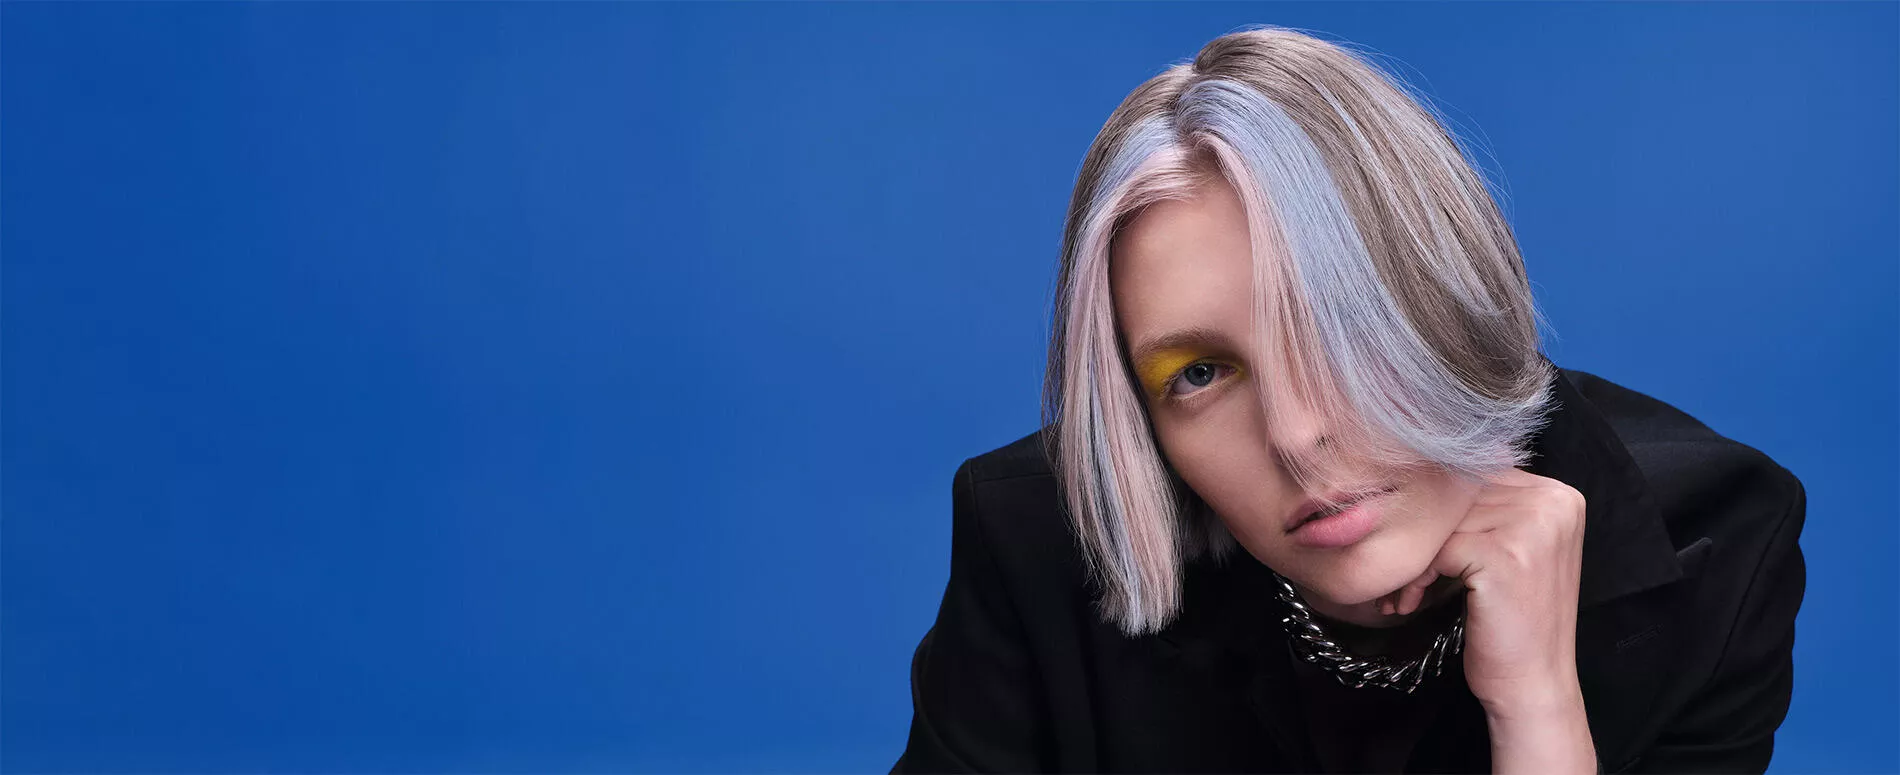 Blonde model wit light blue locks, with blocked face frame colour service, in front of a blue background